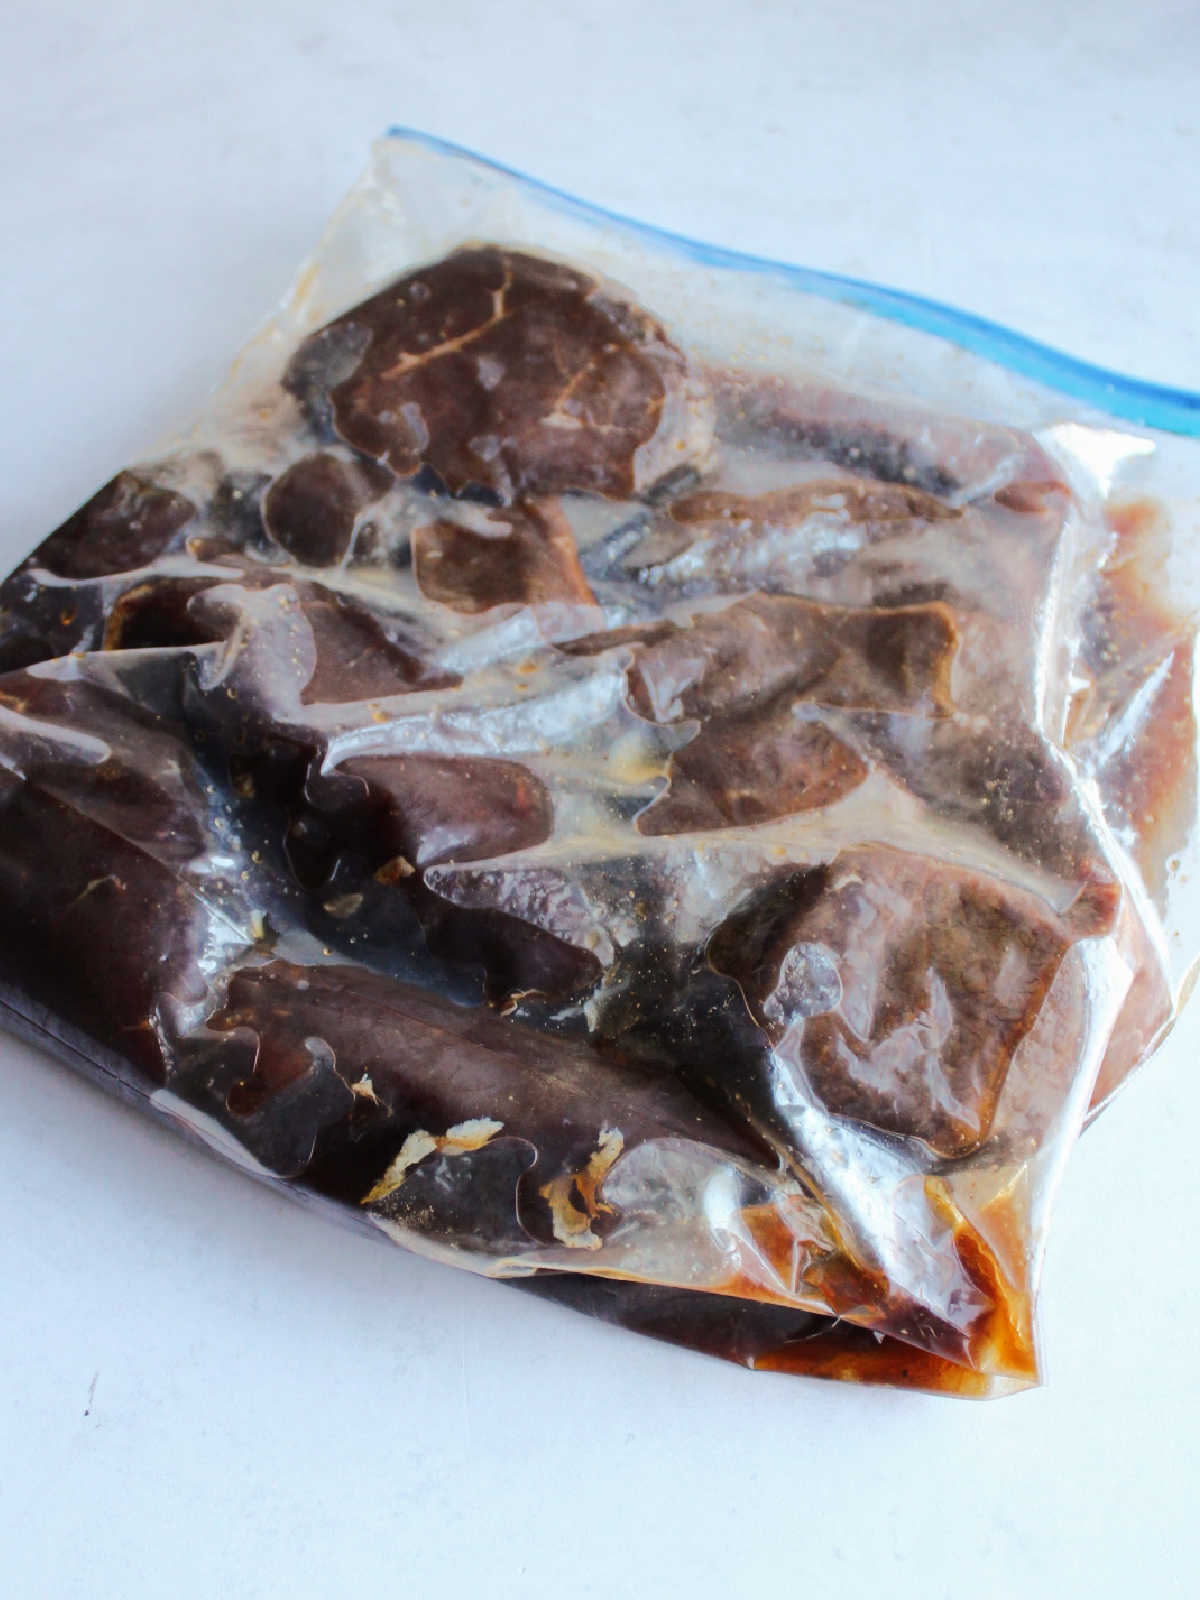 Zipper bag filled with venison backstrap chunks and korean bbq style marinade.